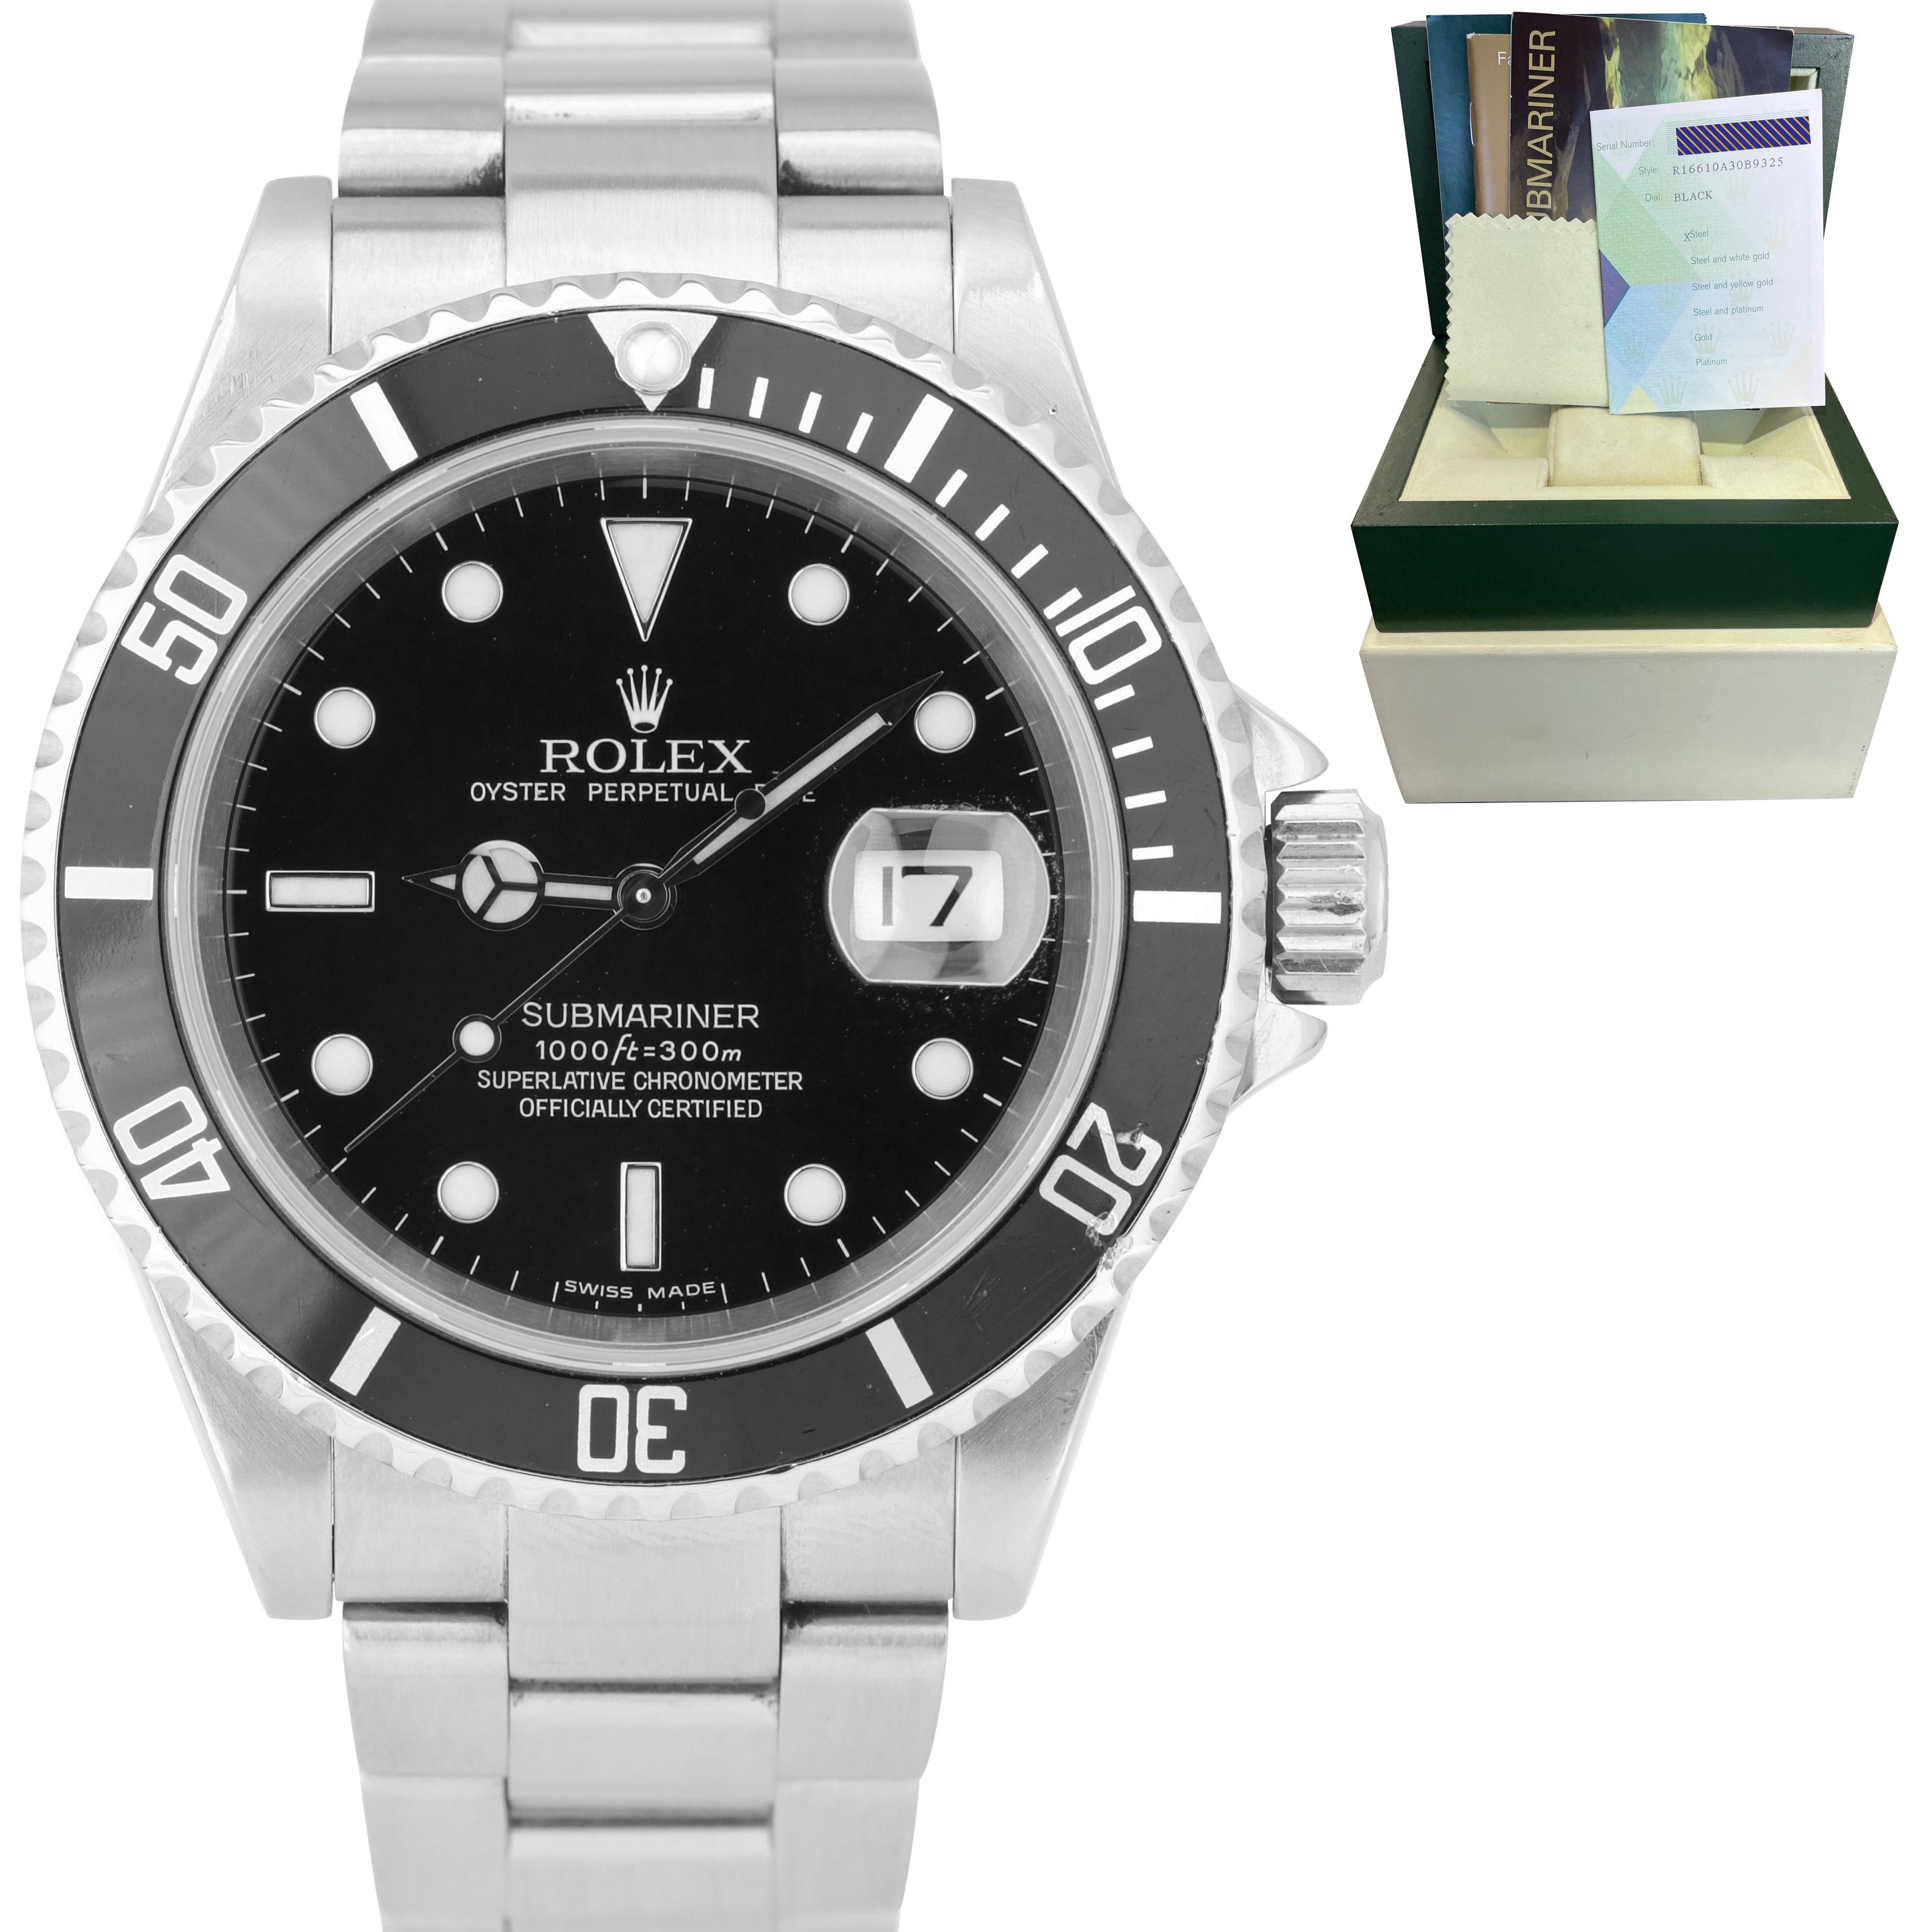 2007 Rolex Submariner Date 16610 T NO-HOLES Pre-Ceramic Stainless Steel Watch